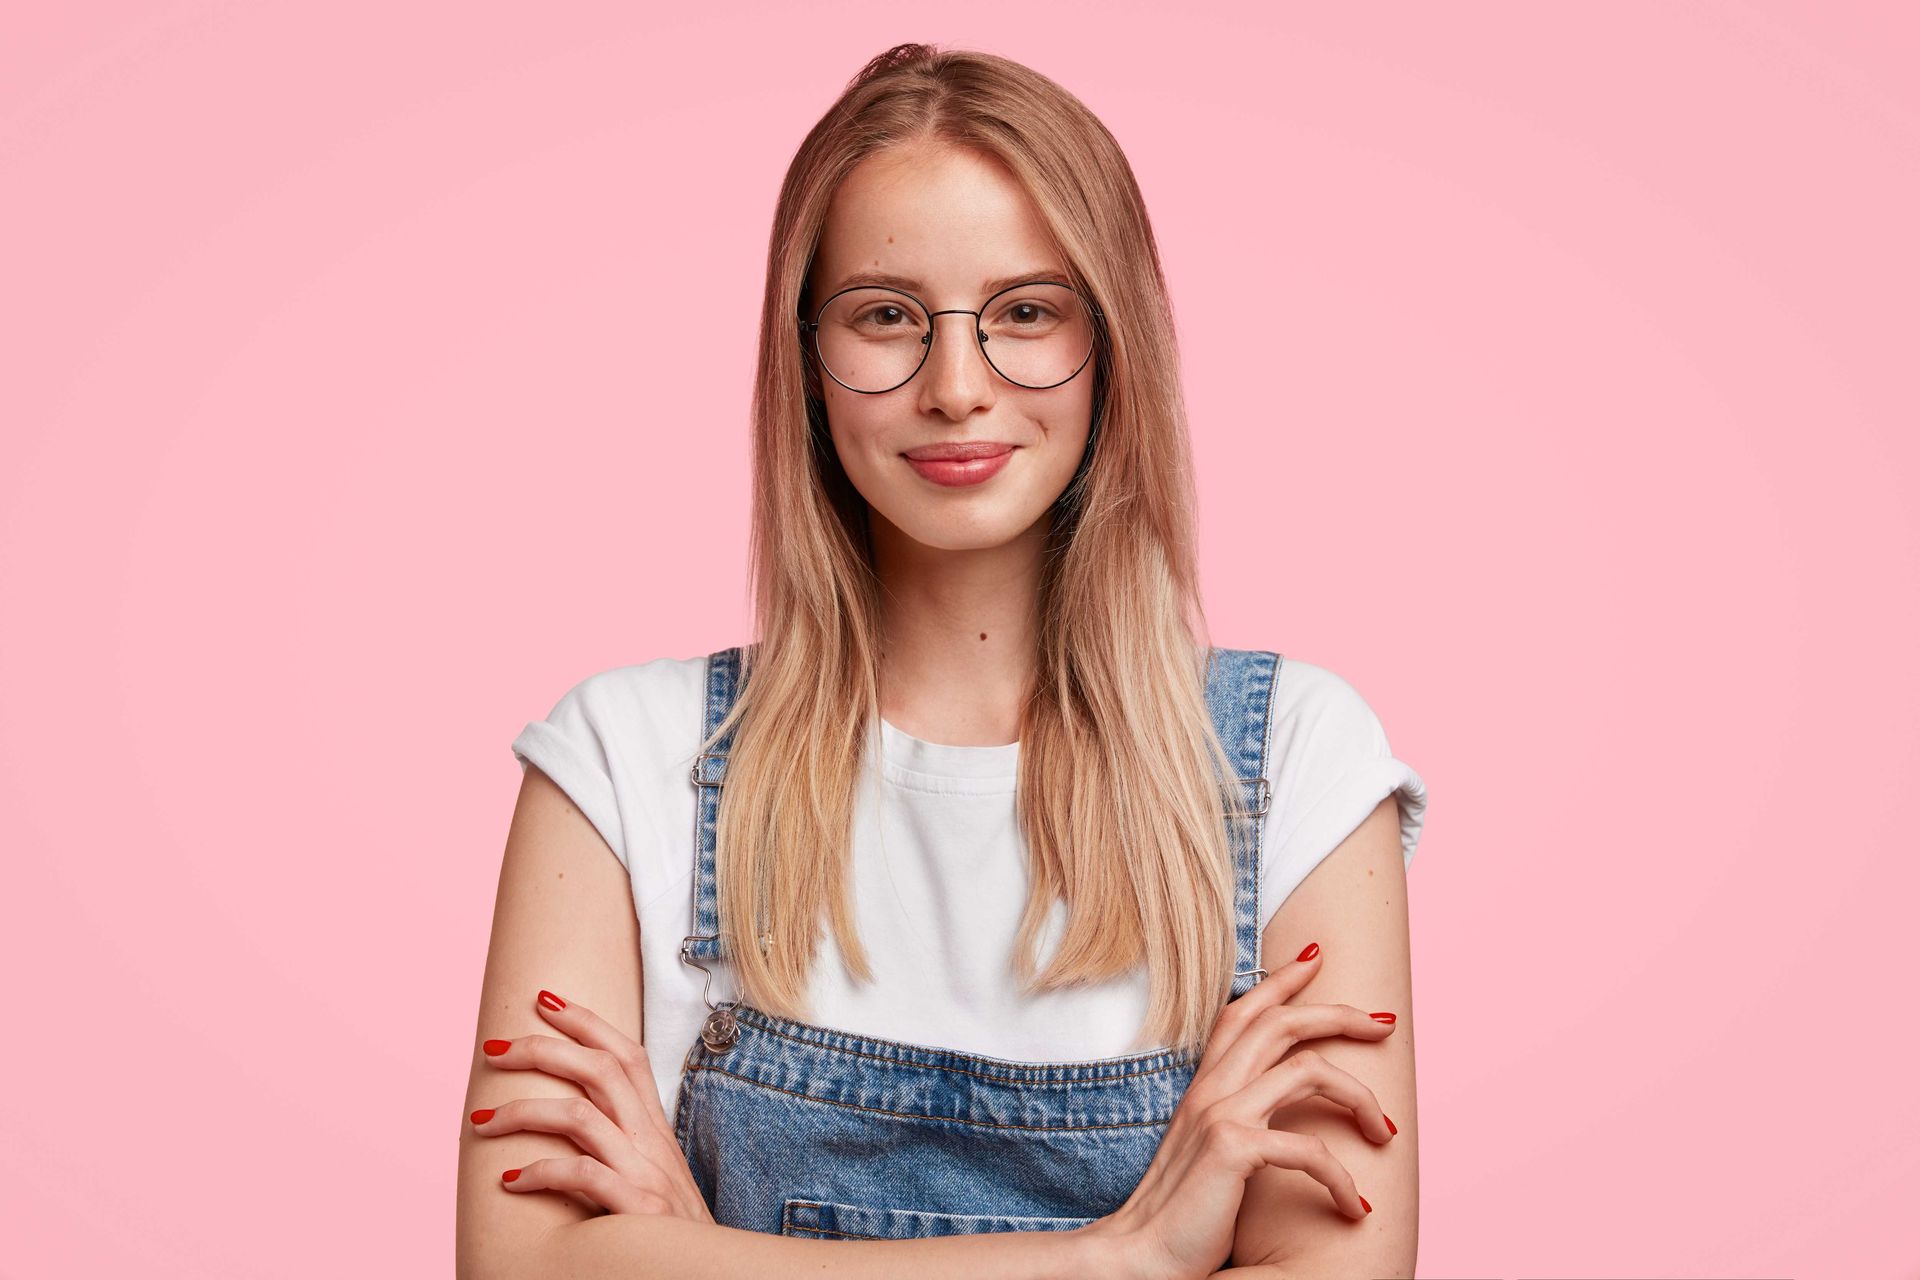 A pretty Texas woman with glasses and jean overalls over a white t-shirt